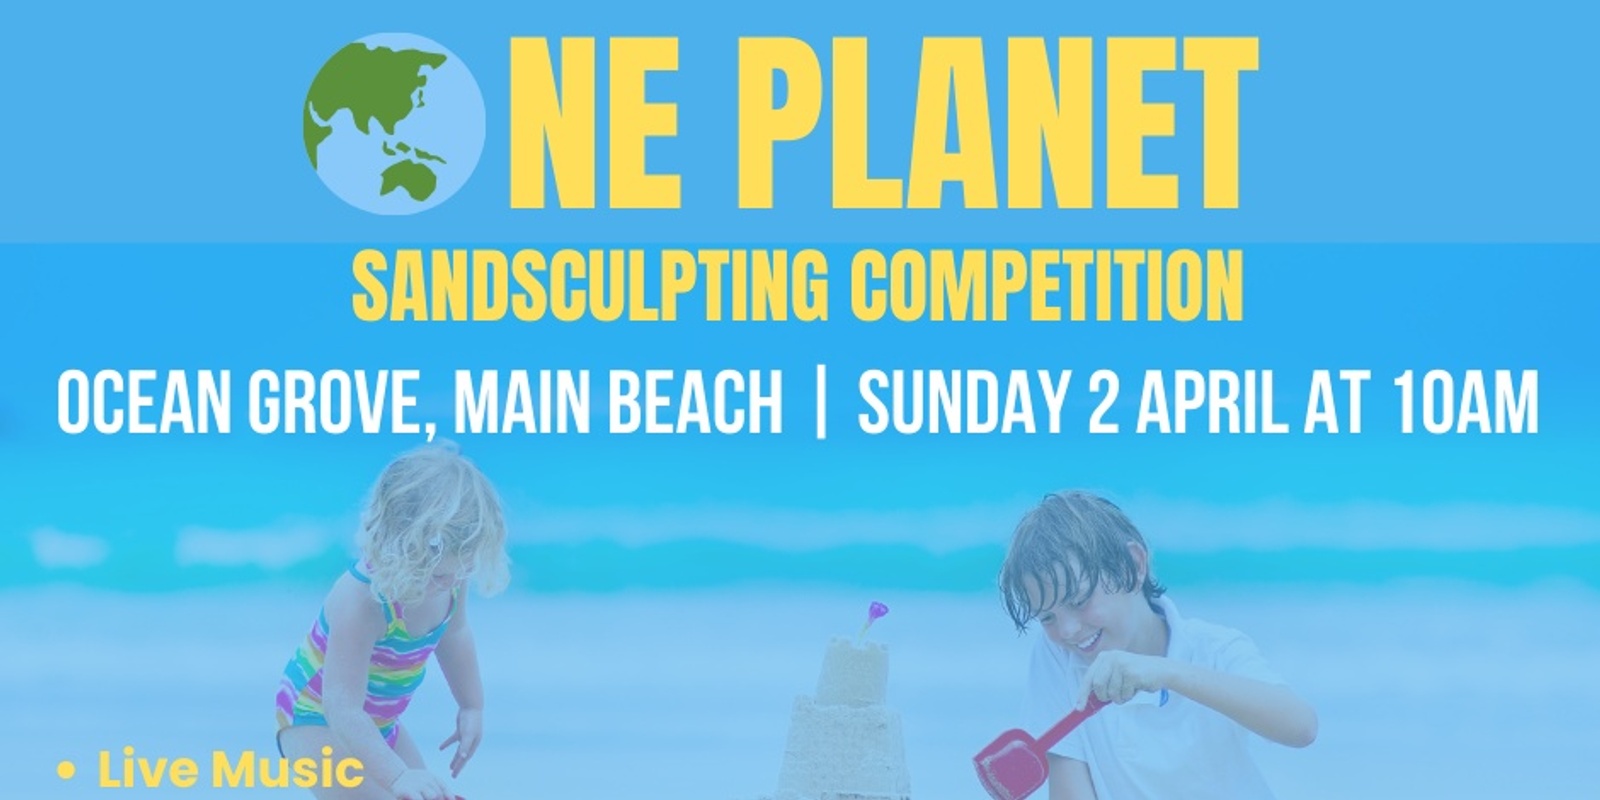 One Planet - Sandsculpting Competition